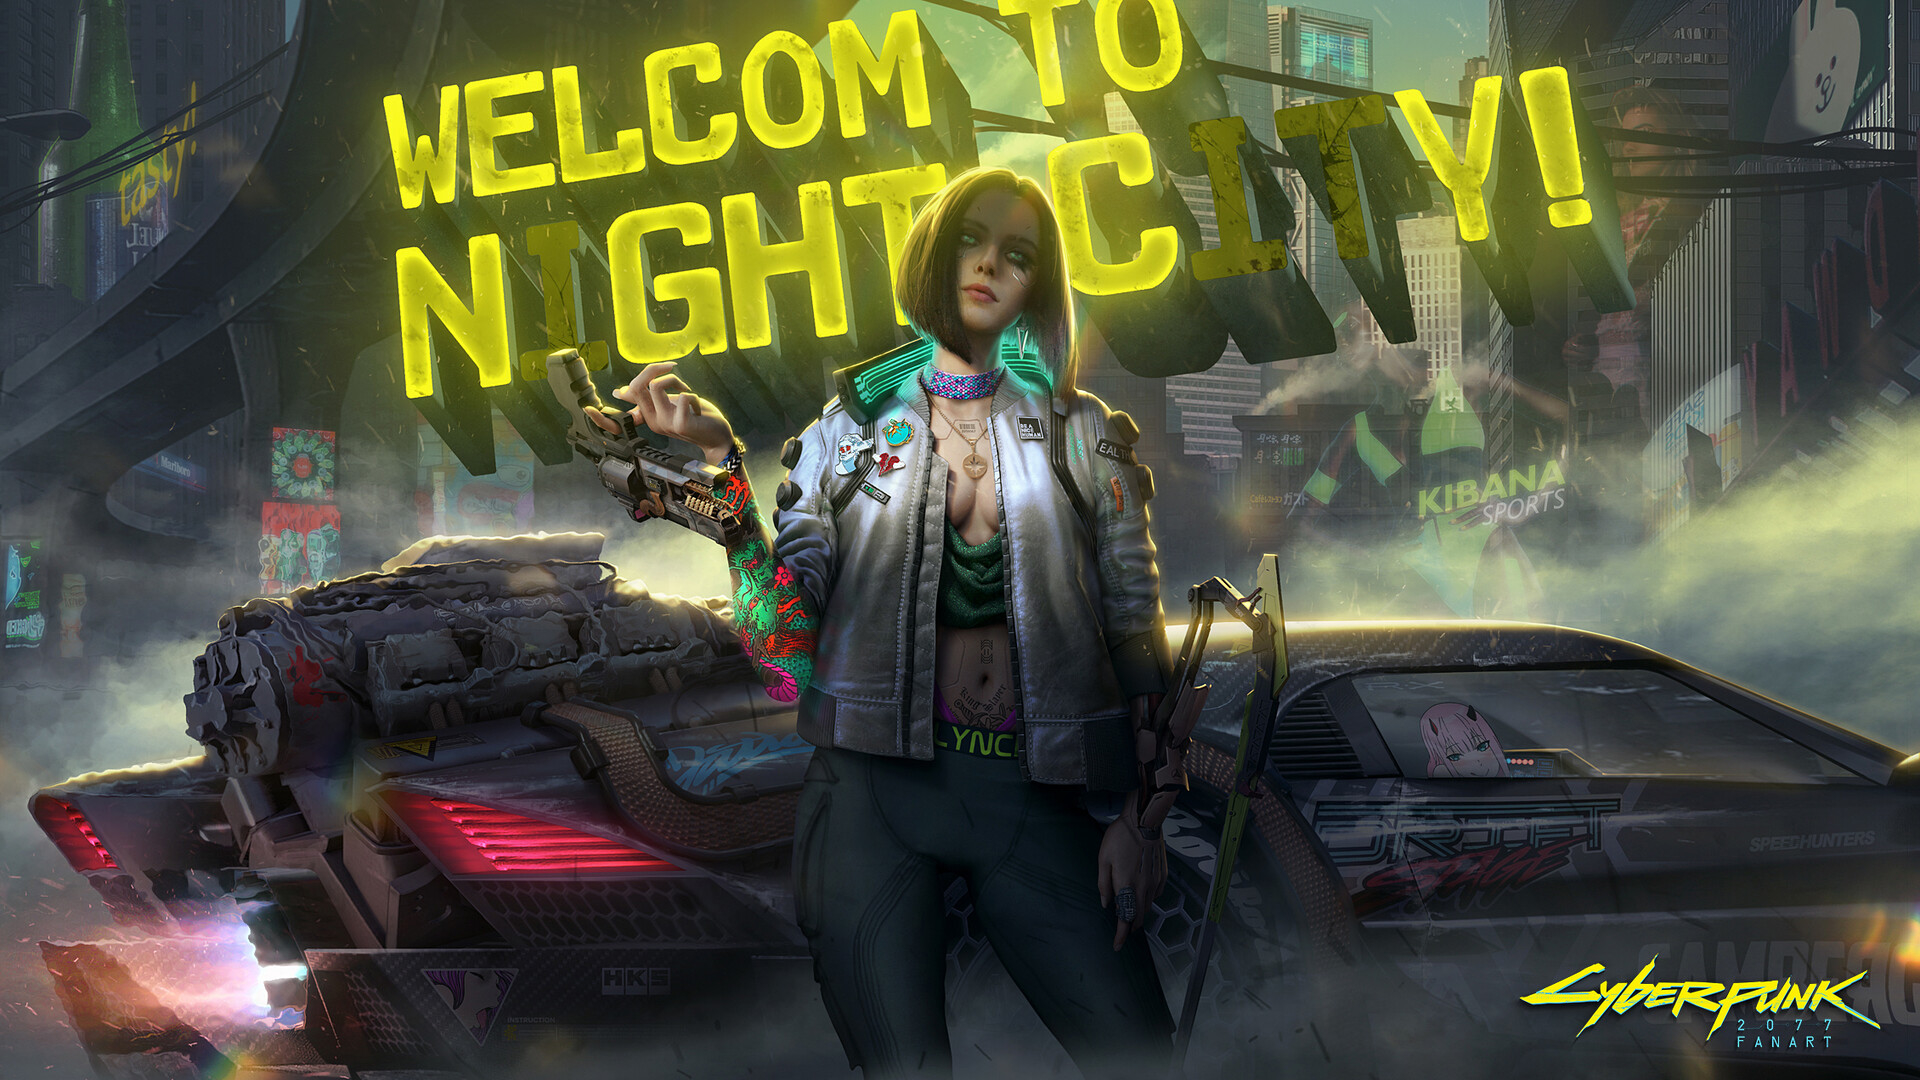 Neon Welcome To Night City Cyberpunk 2077 Wallpaper Hd Games 4k Wallpapers Images Photos And Background Tons of awesome cyberpunk 2077 hd wallpapers to download for free. night city cyberpunk 2077 wallpaper hd